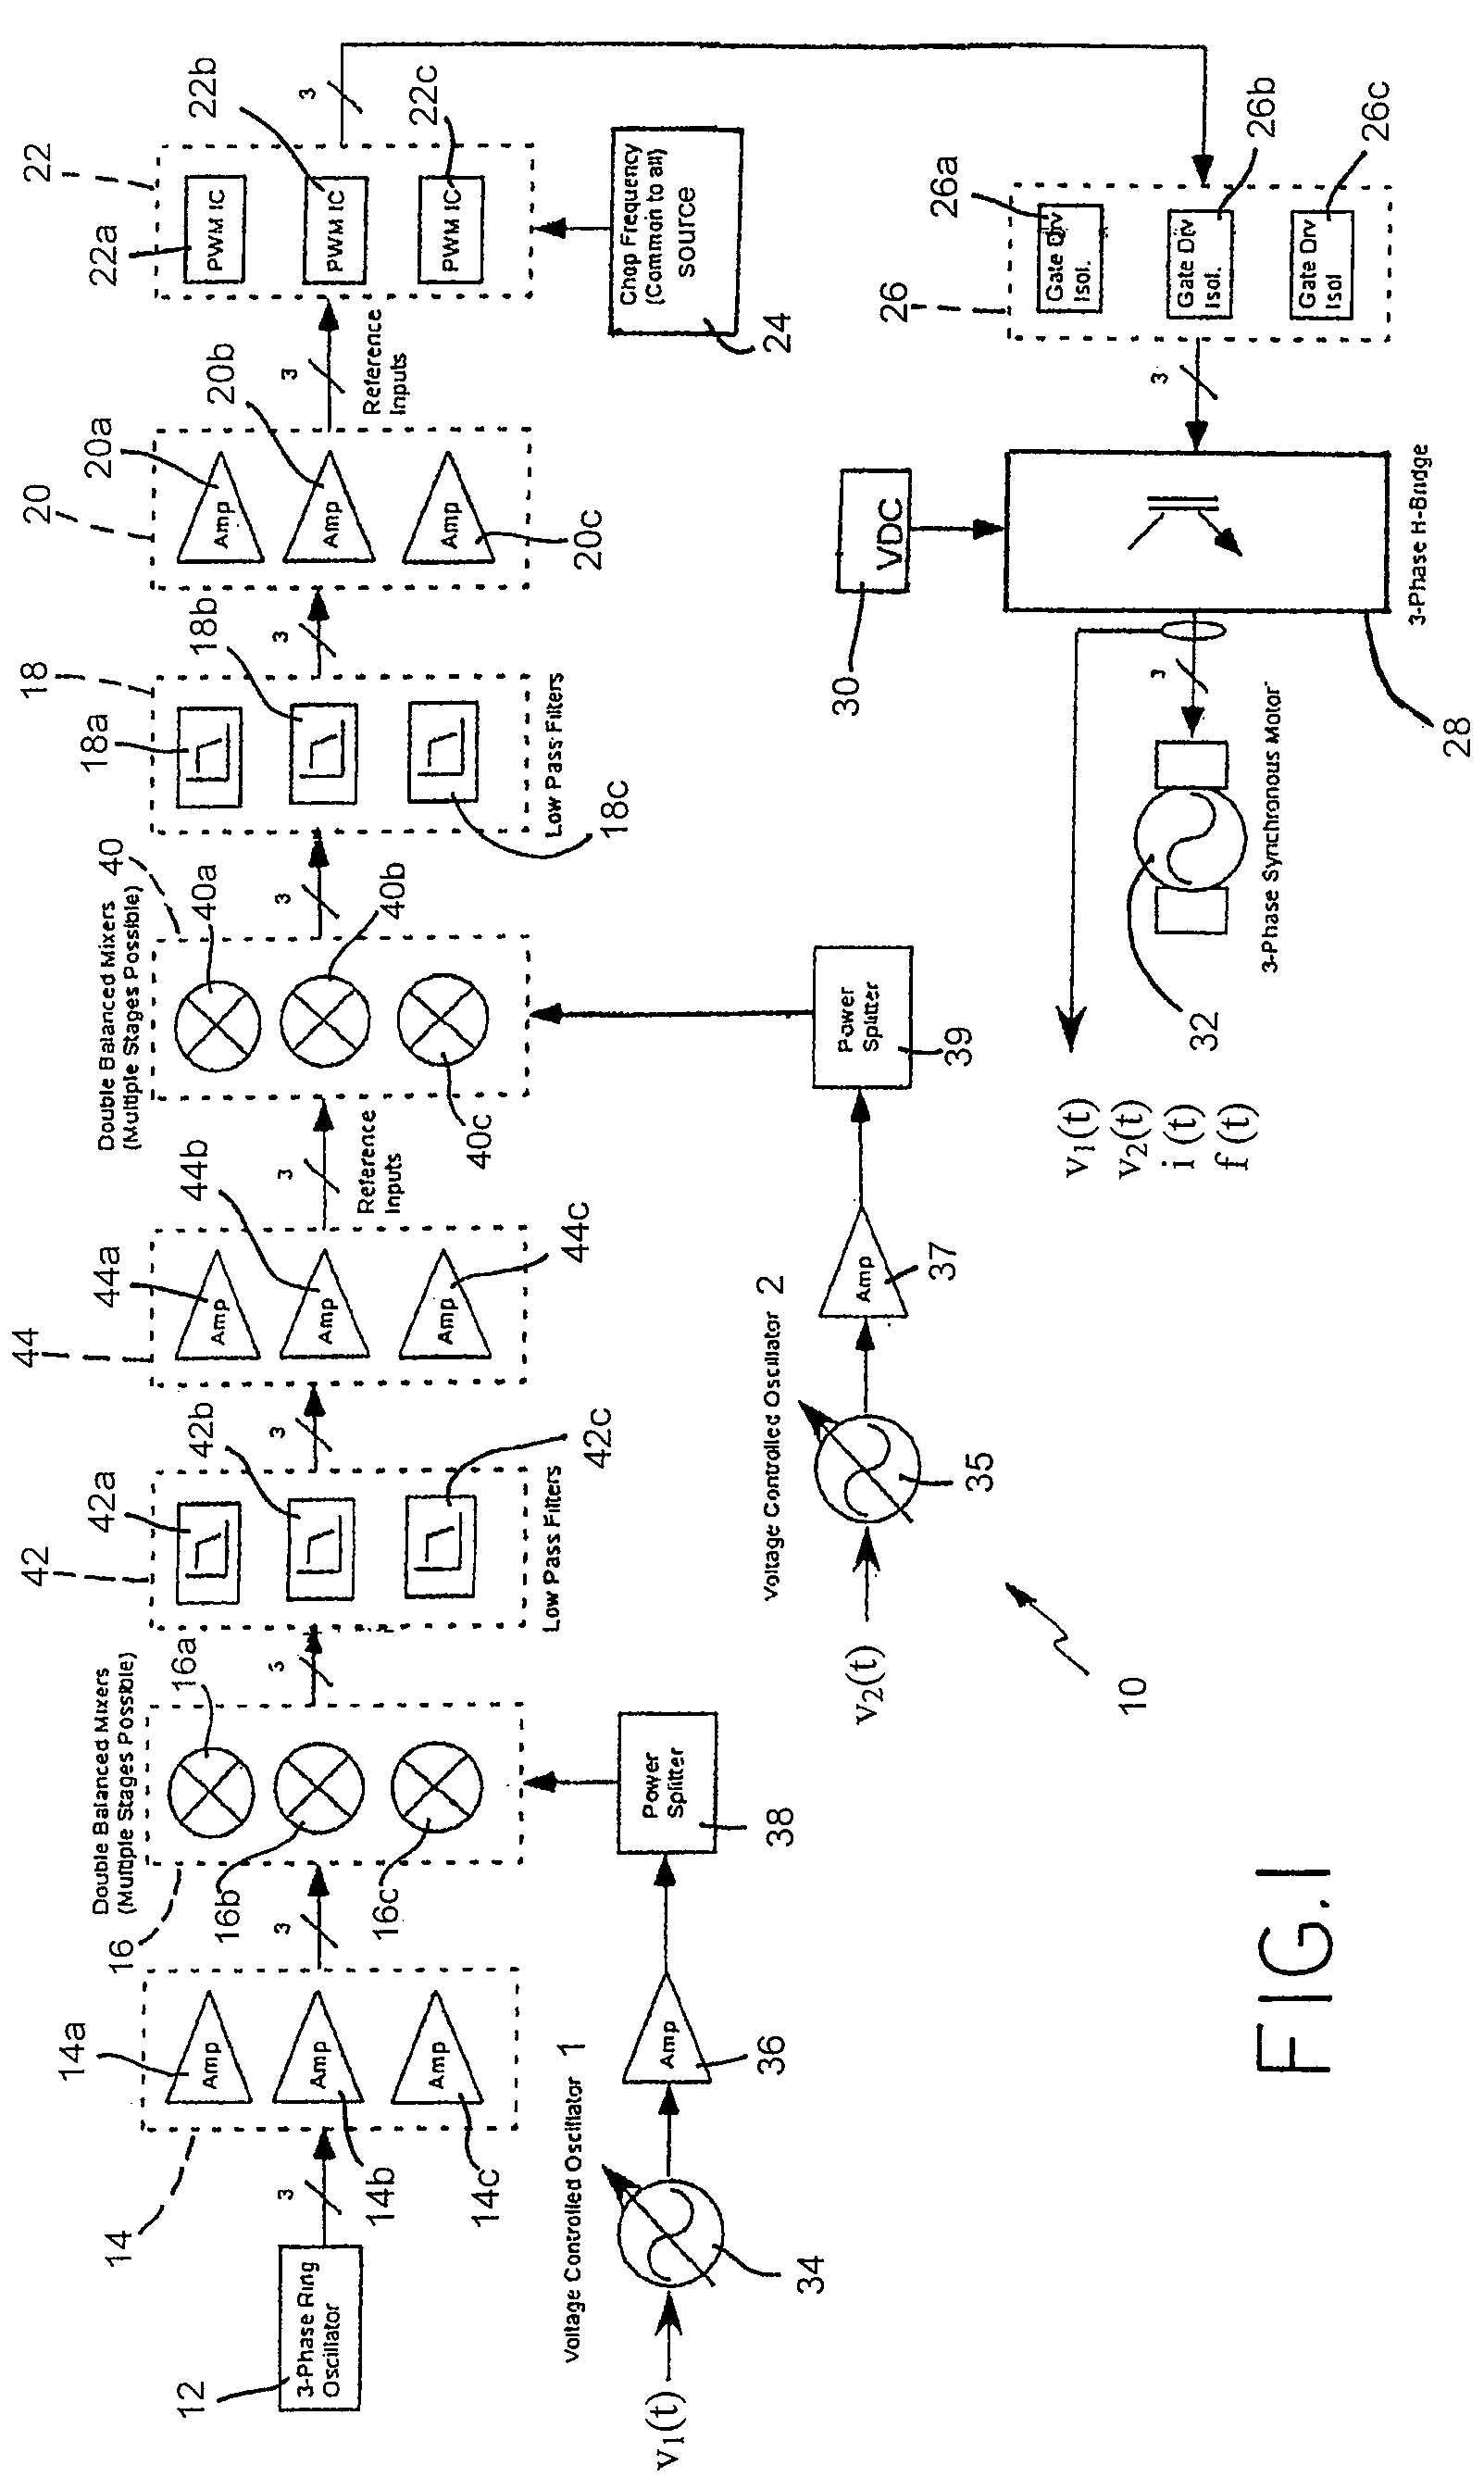 Multi-phase, multi-frequency controller